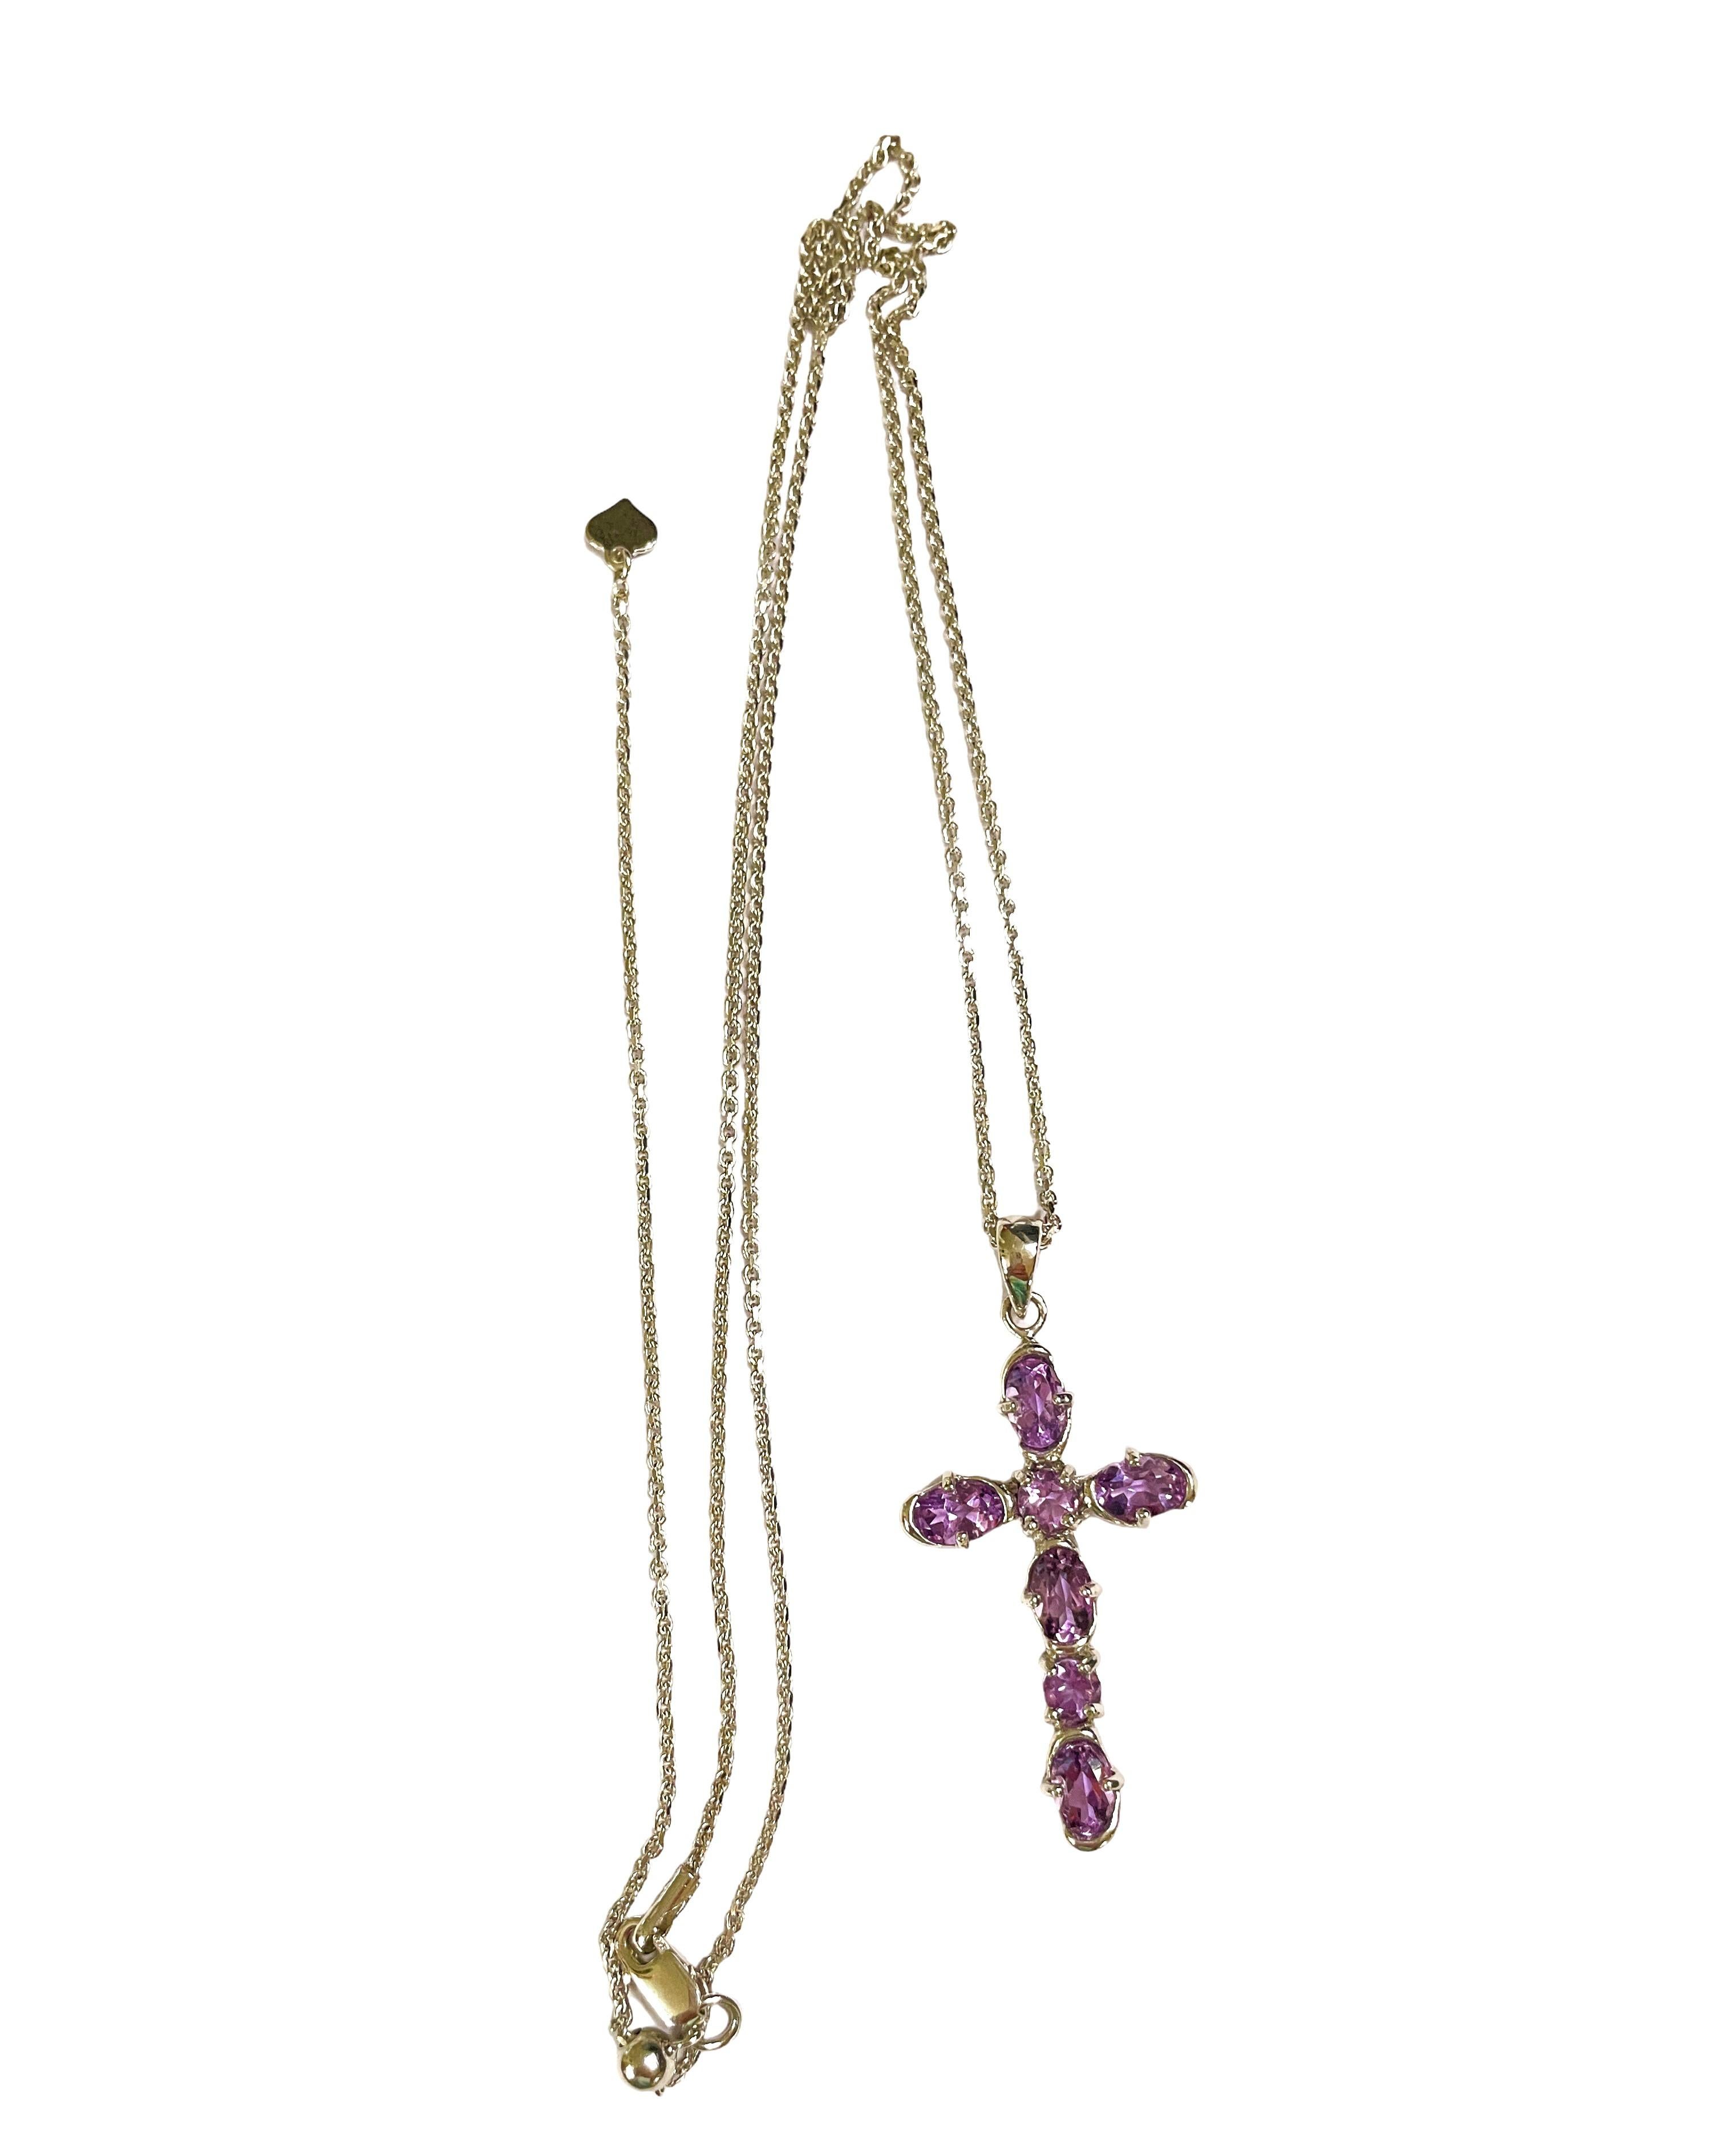 New Amethyst Sterling Silver Cross Necklace with Adjustable Chain In New Condition For Sale In Eagan, MN